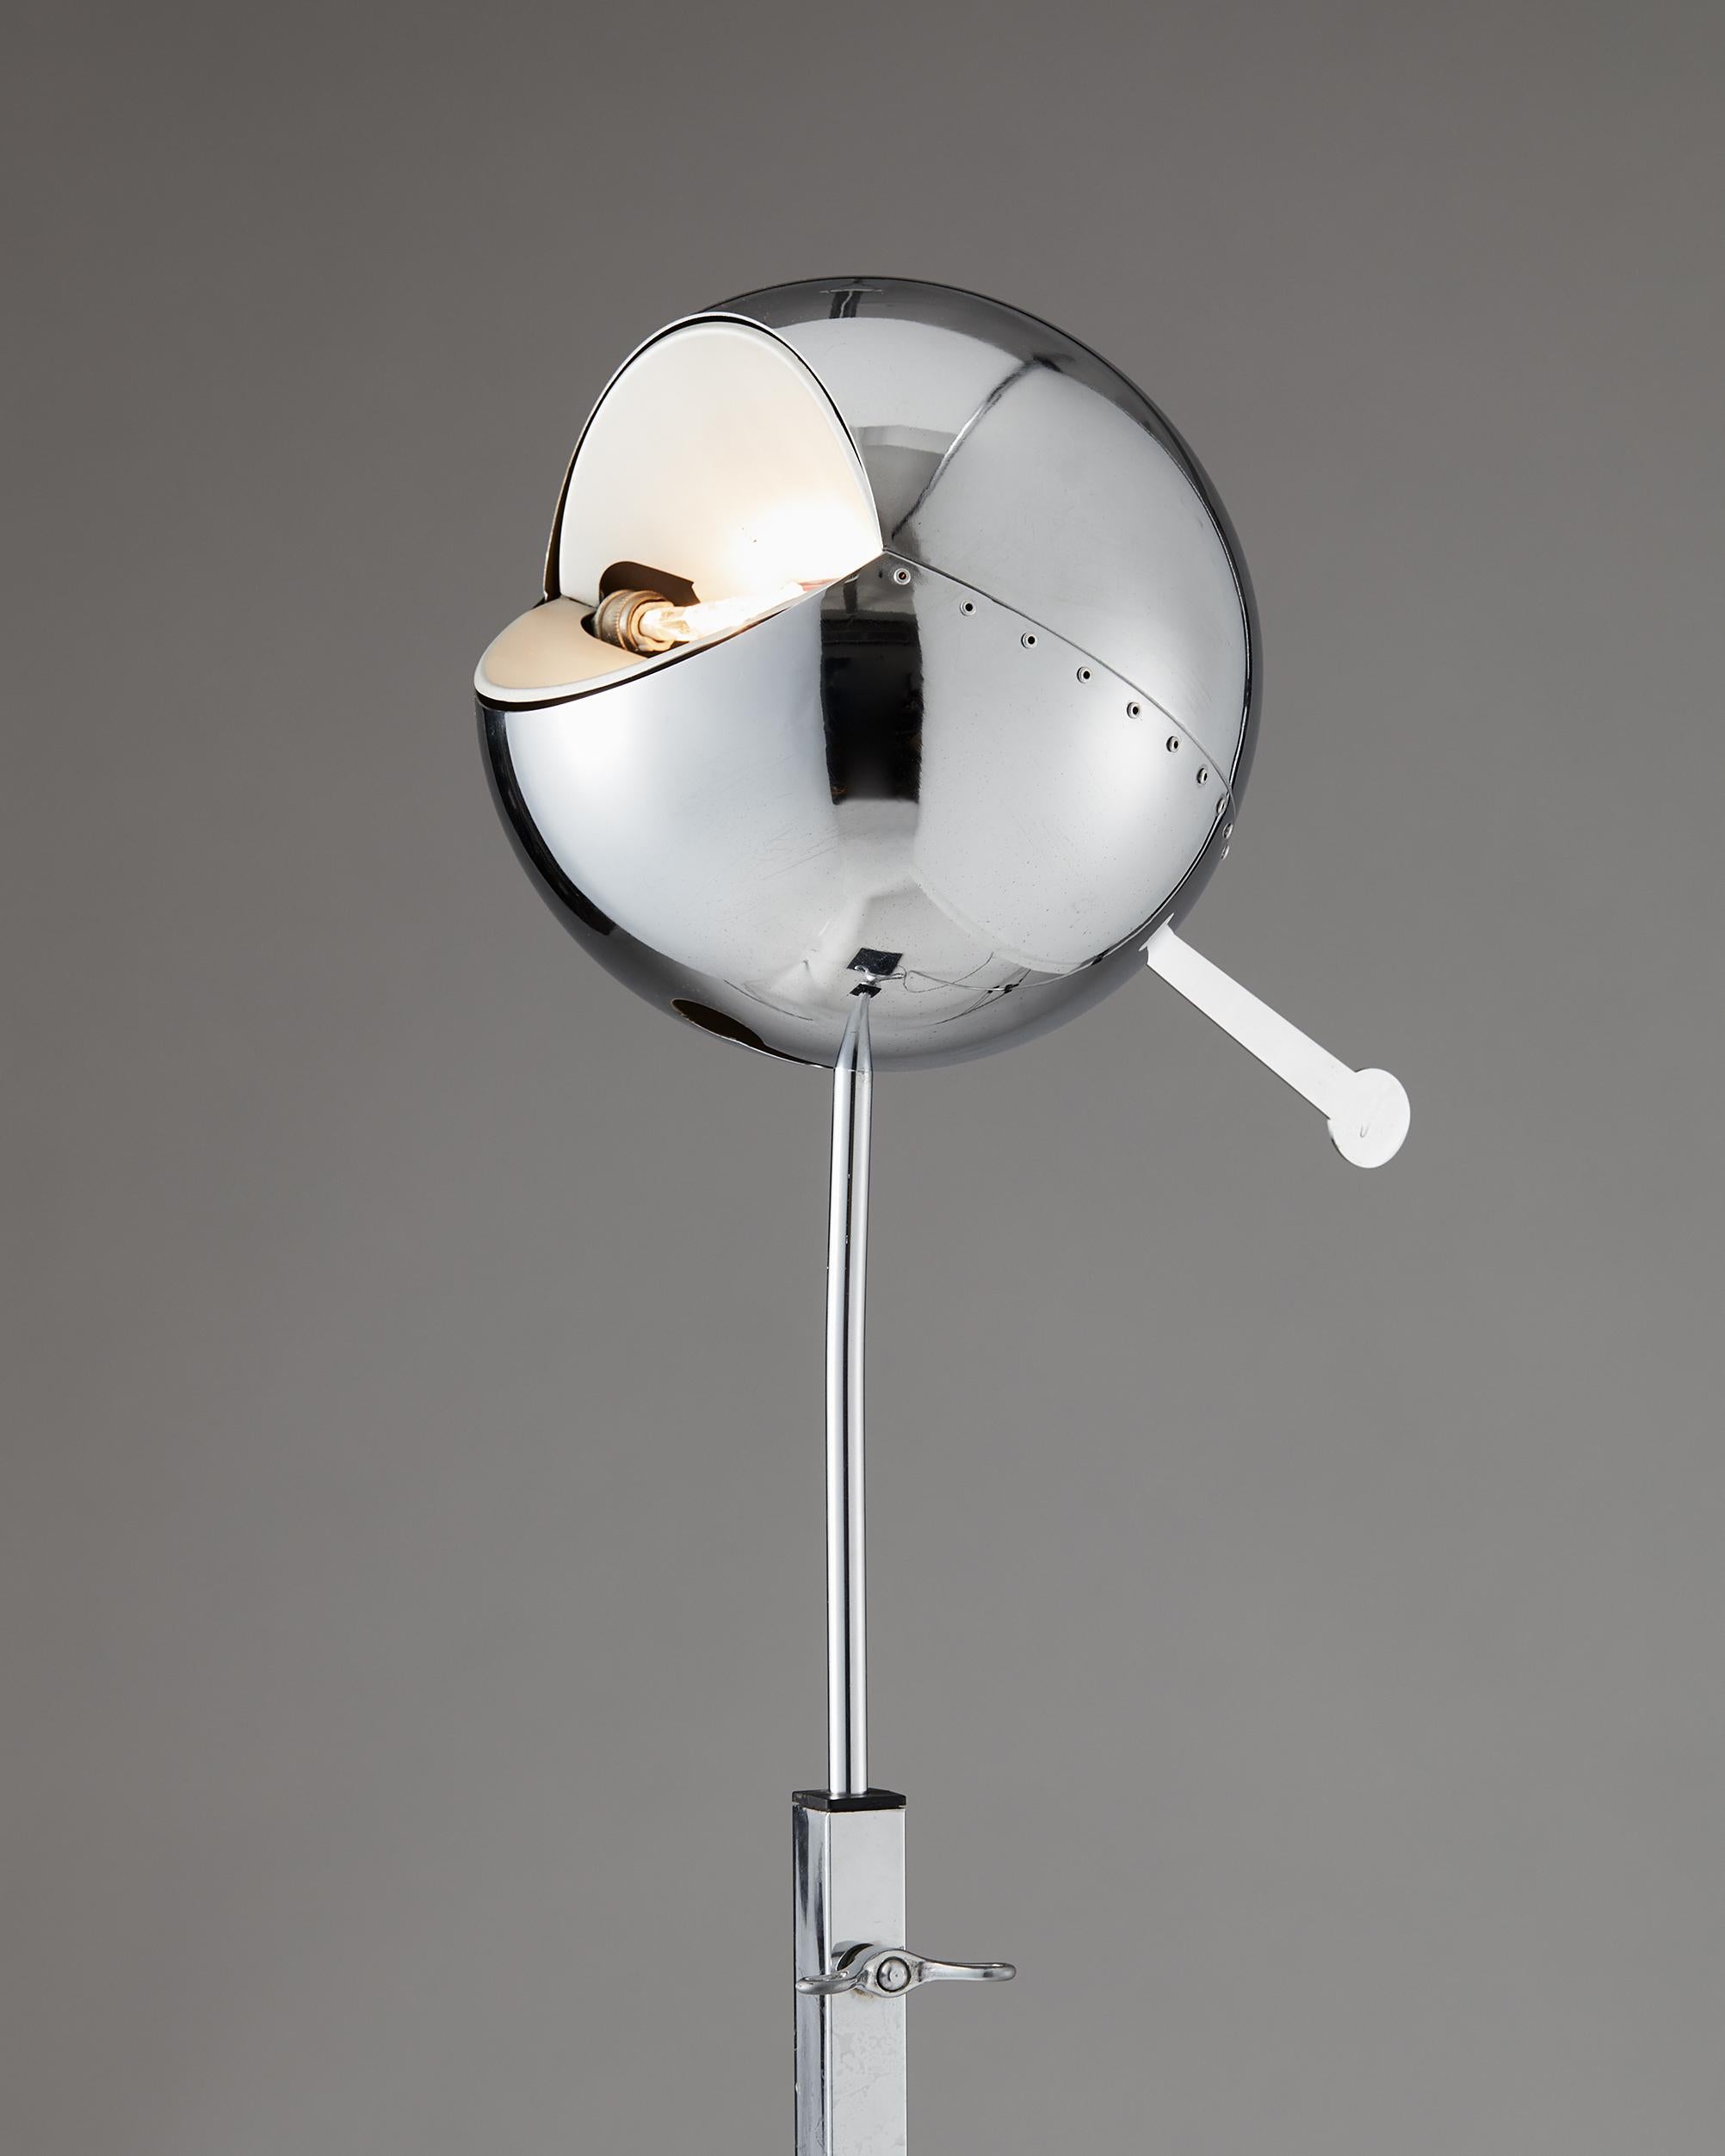 Late 20th Century Floor Lamp “Fire Ball” Designed by Carlo Forcolini, 1980s For Sale